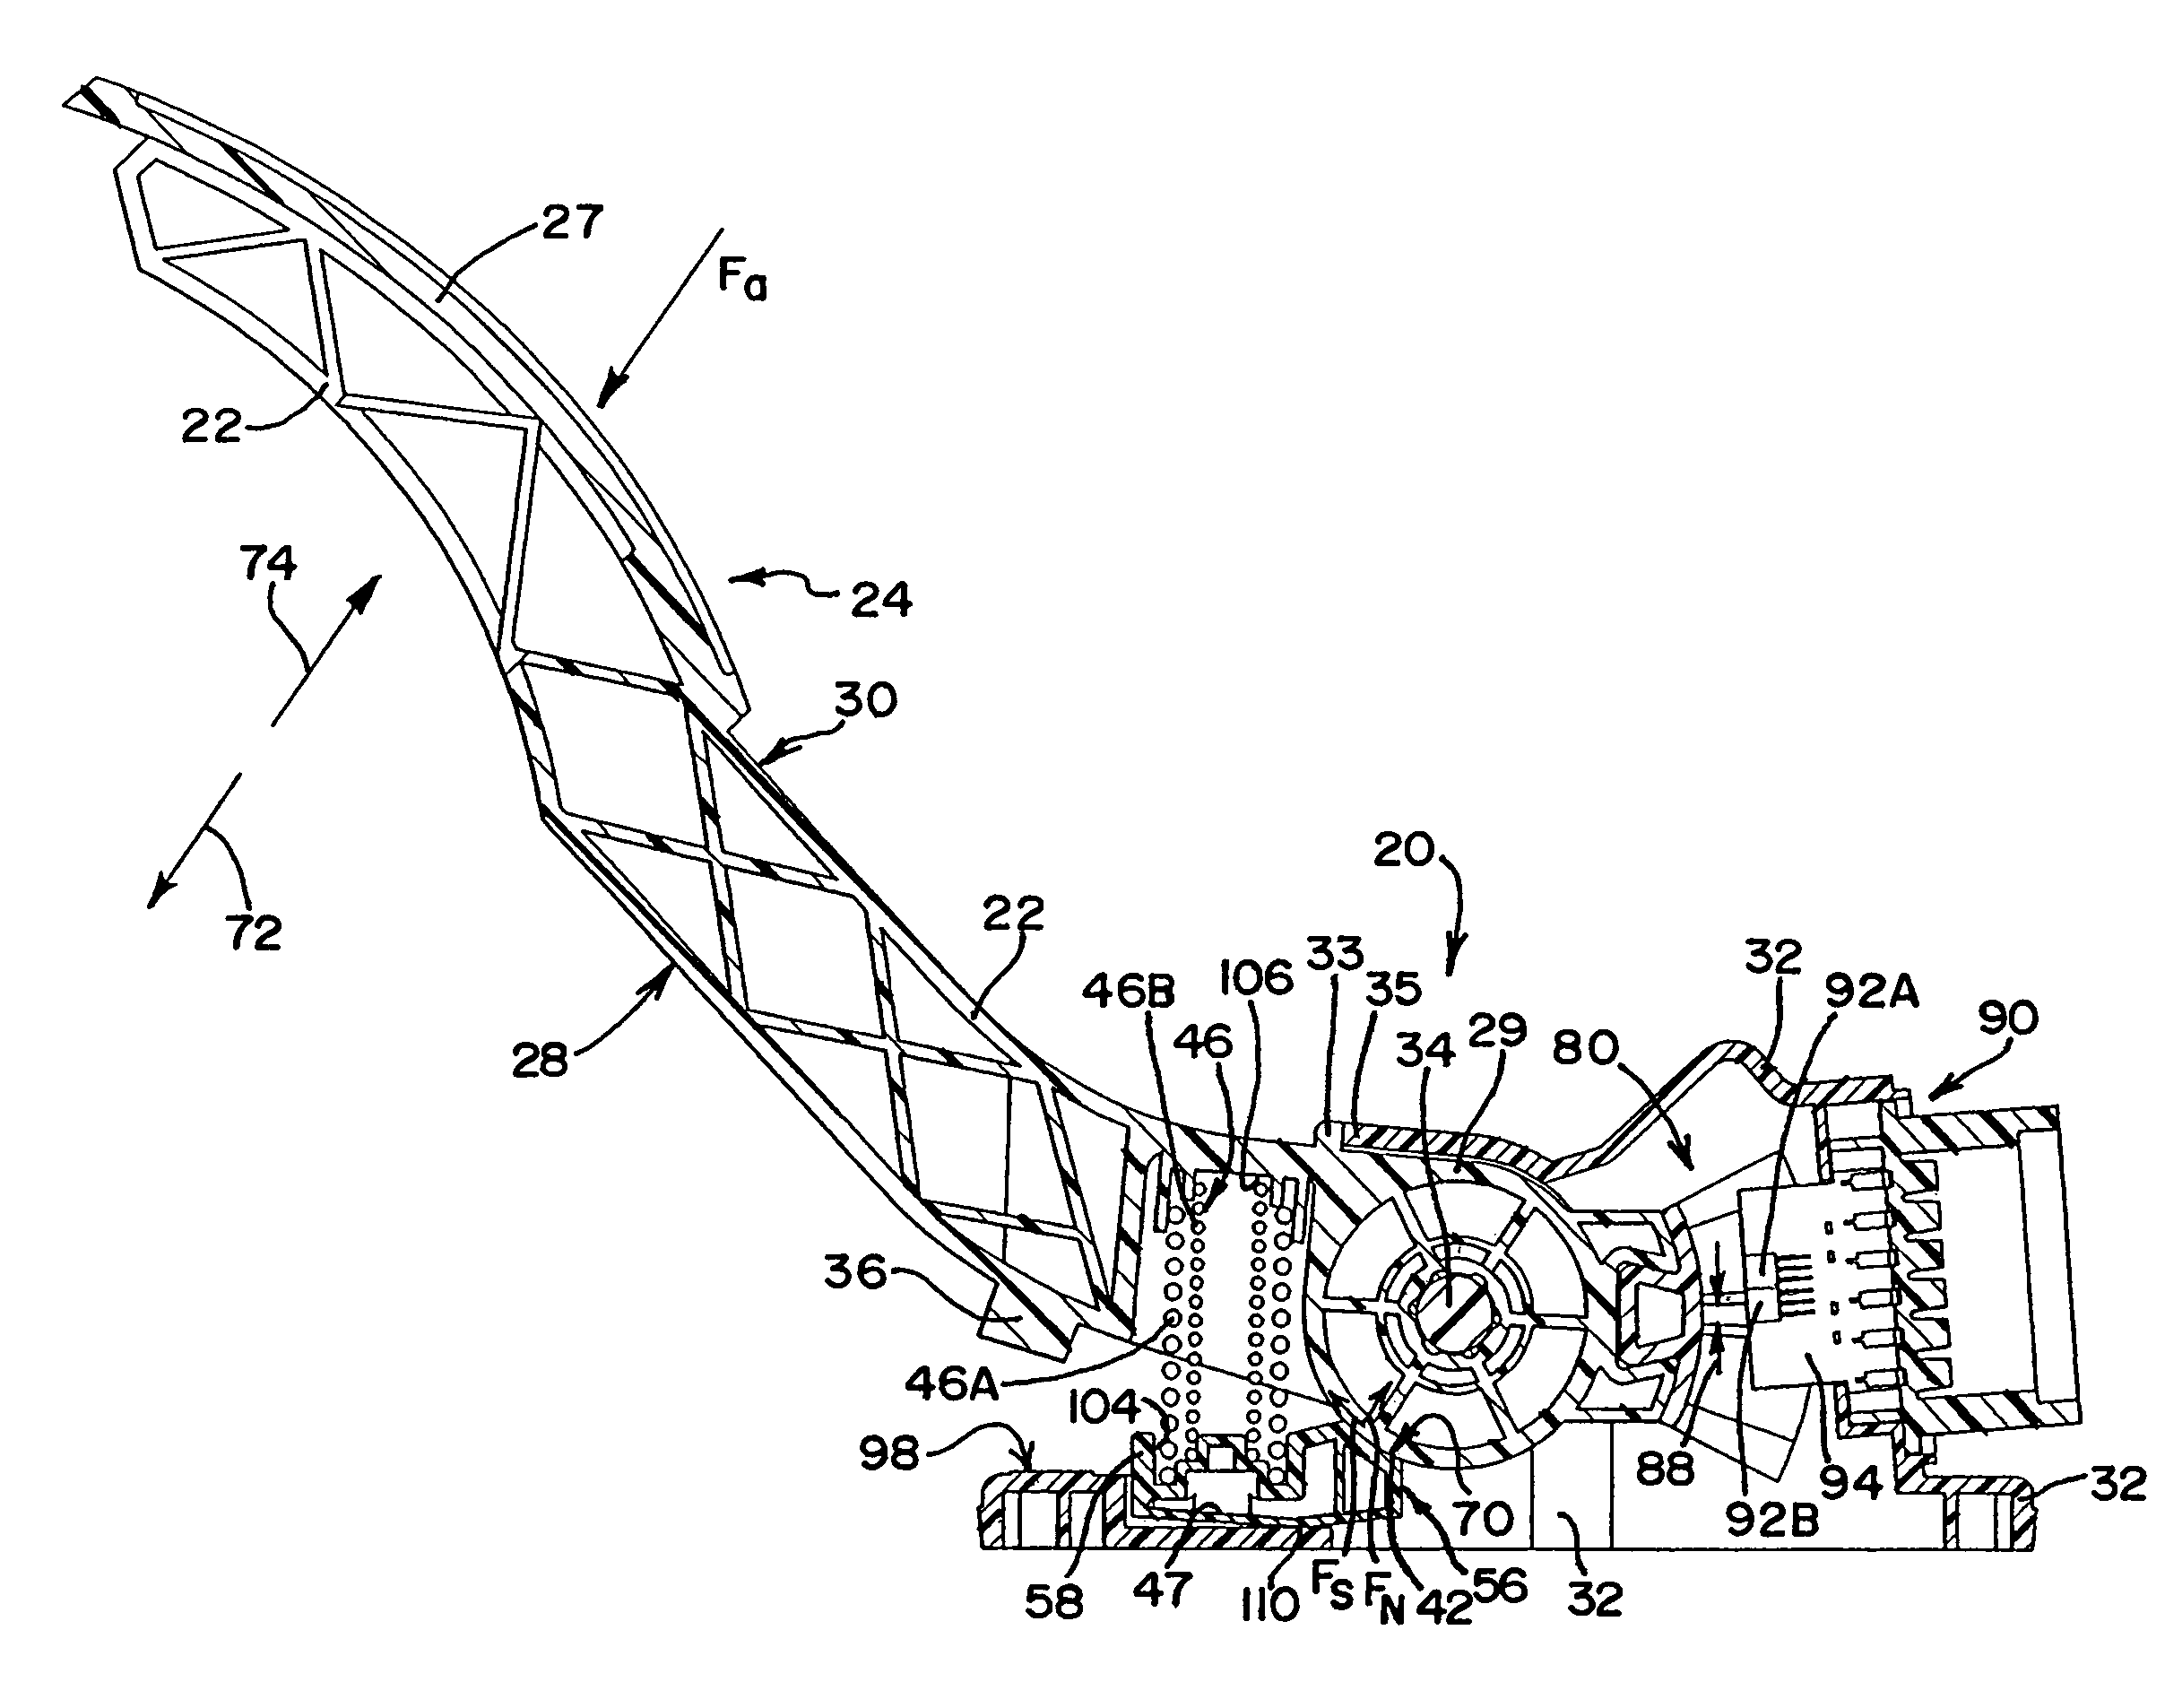 Accelerator pedal for motorized vehicle